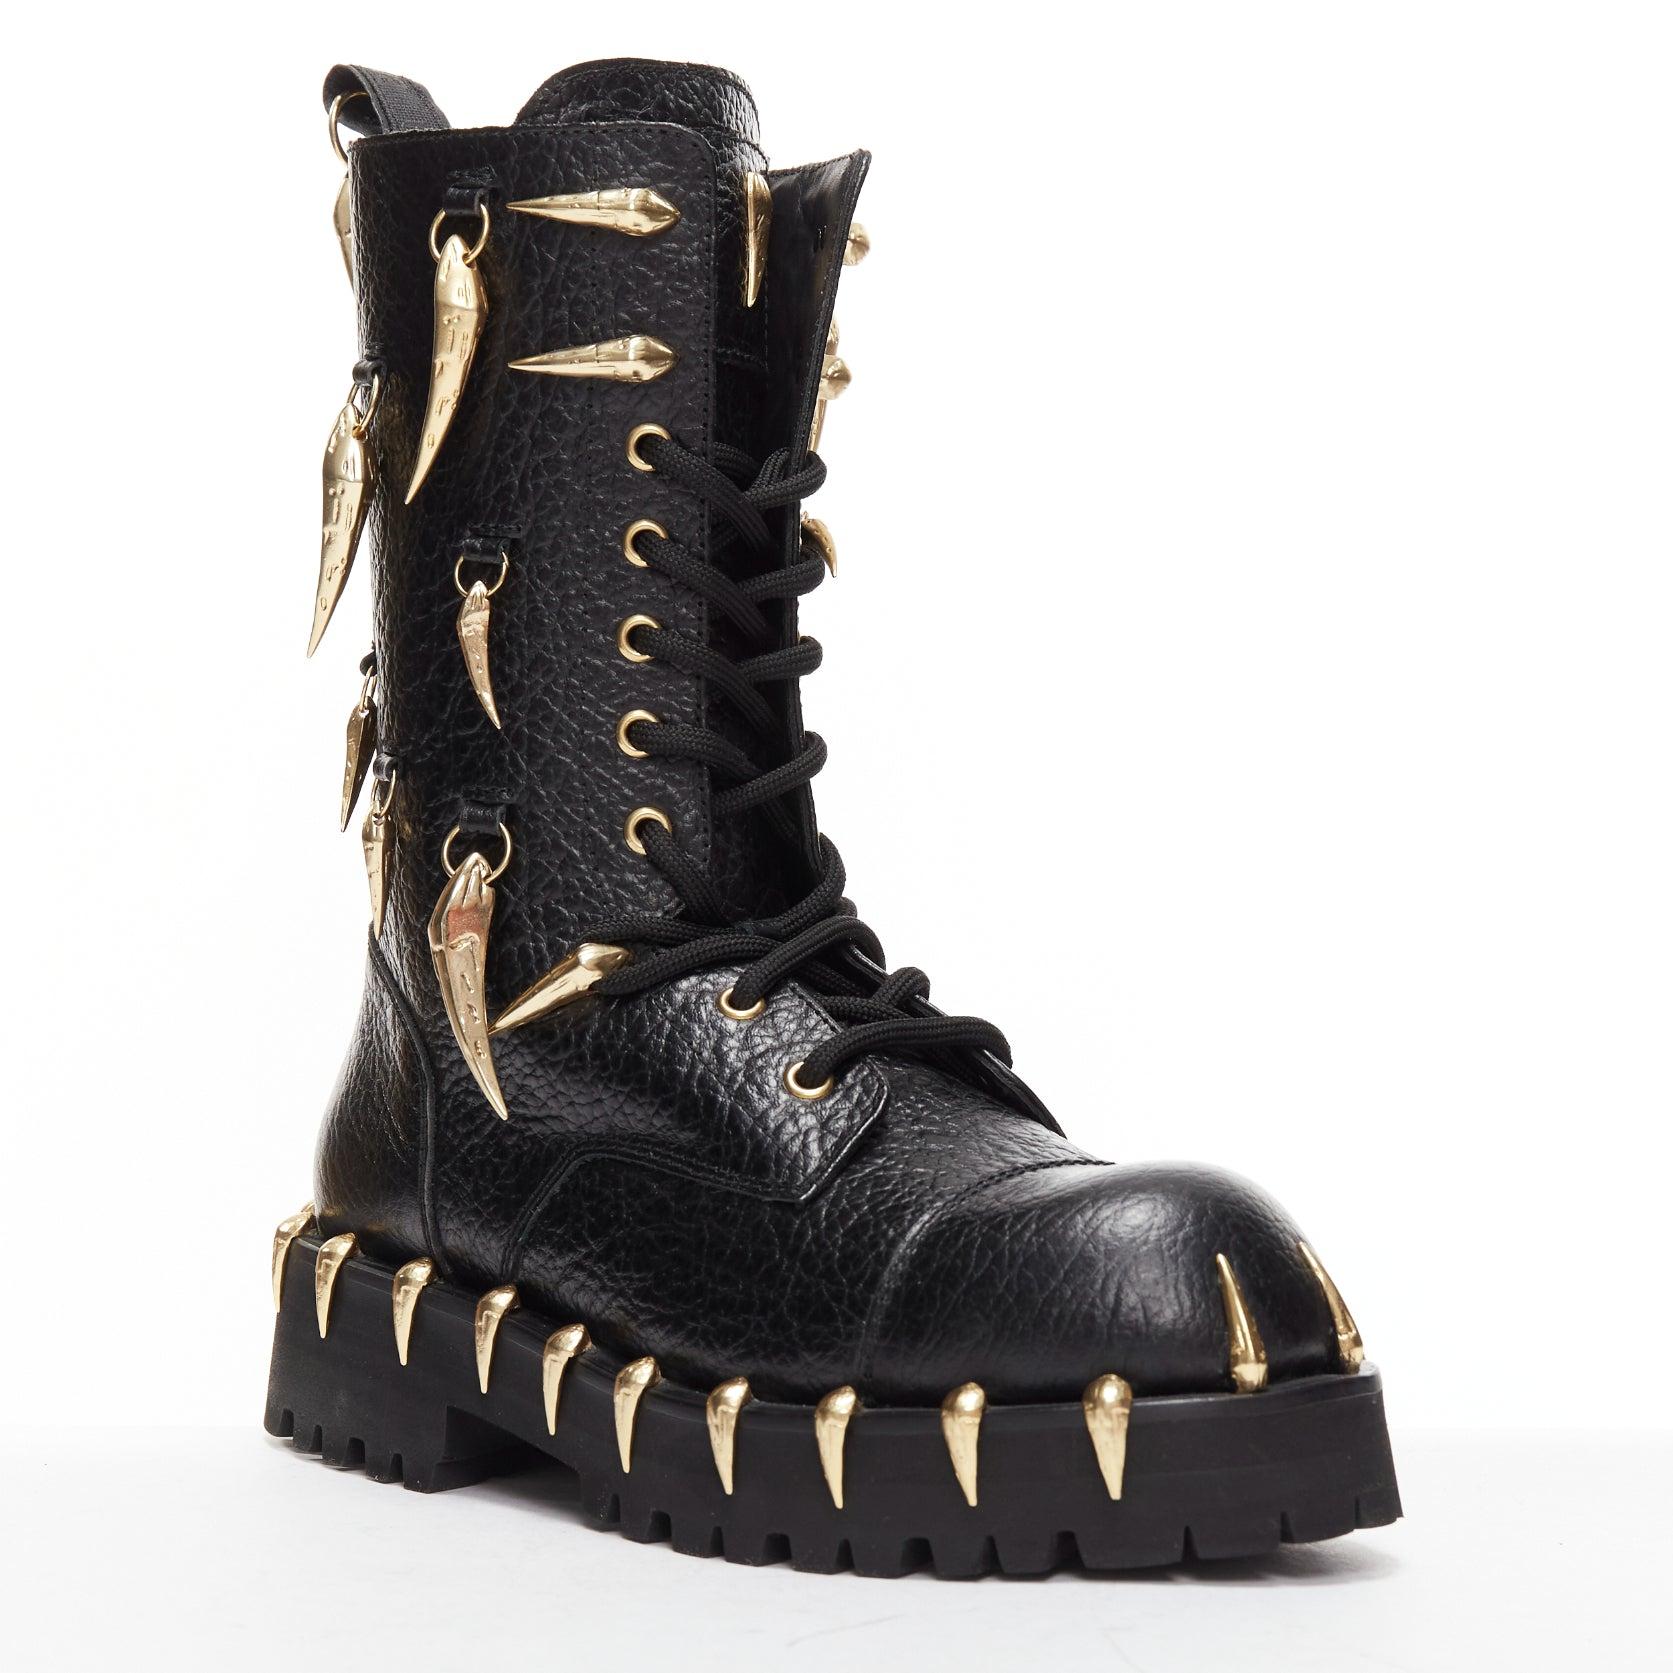 new ROBERTO CAVALLI 2022 gold horn charm embellished black leather combat boots EU39
Reference: AAWC/A00555
Brand: Roberto Cavalli
Material: Leather, Metal
Color: Black, Gold
Pattern: Solid
Closure: Lace Up
Lining: Black Leather
Extra Details: These